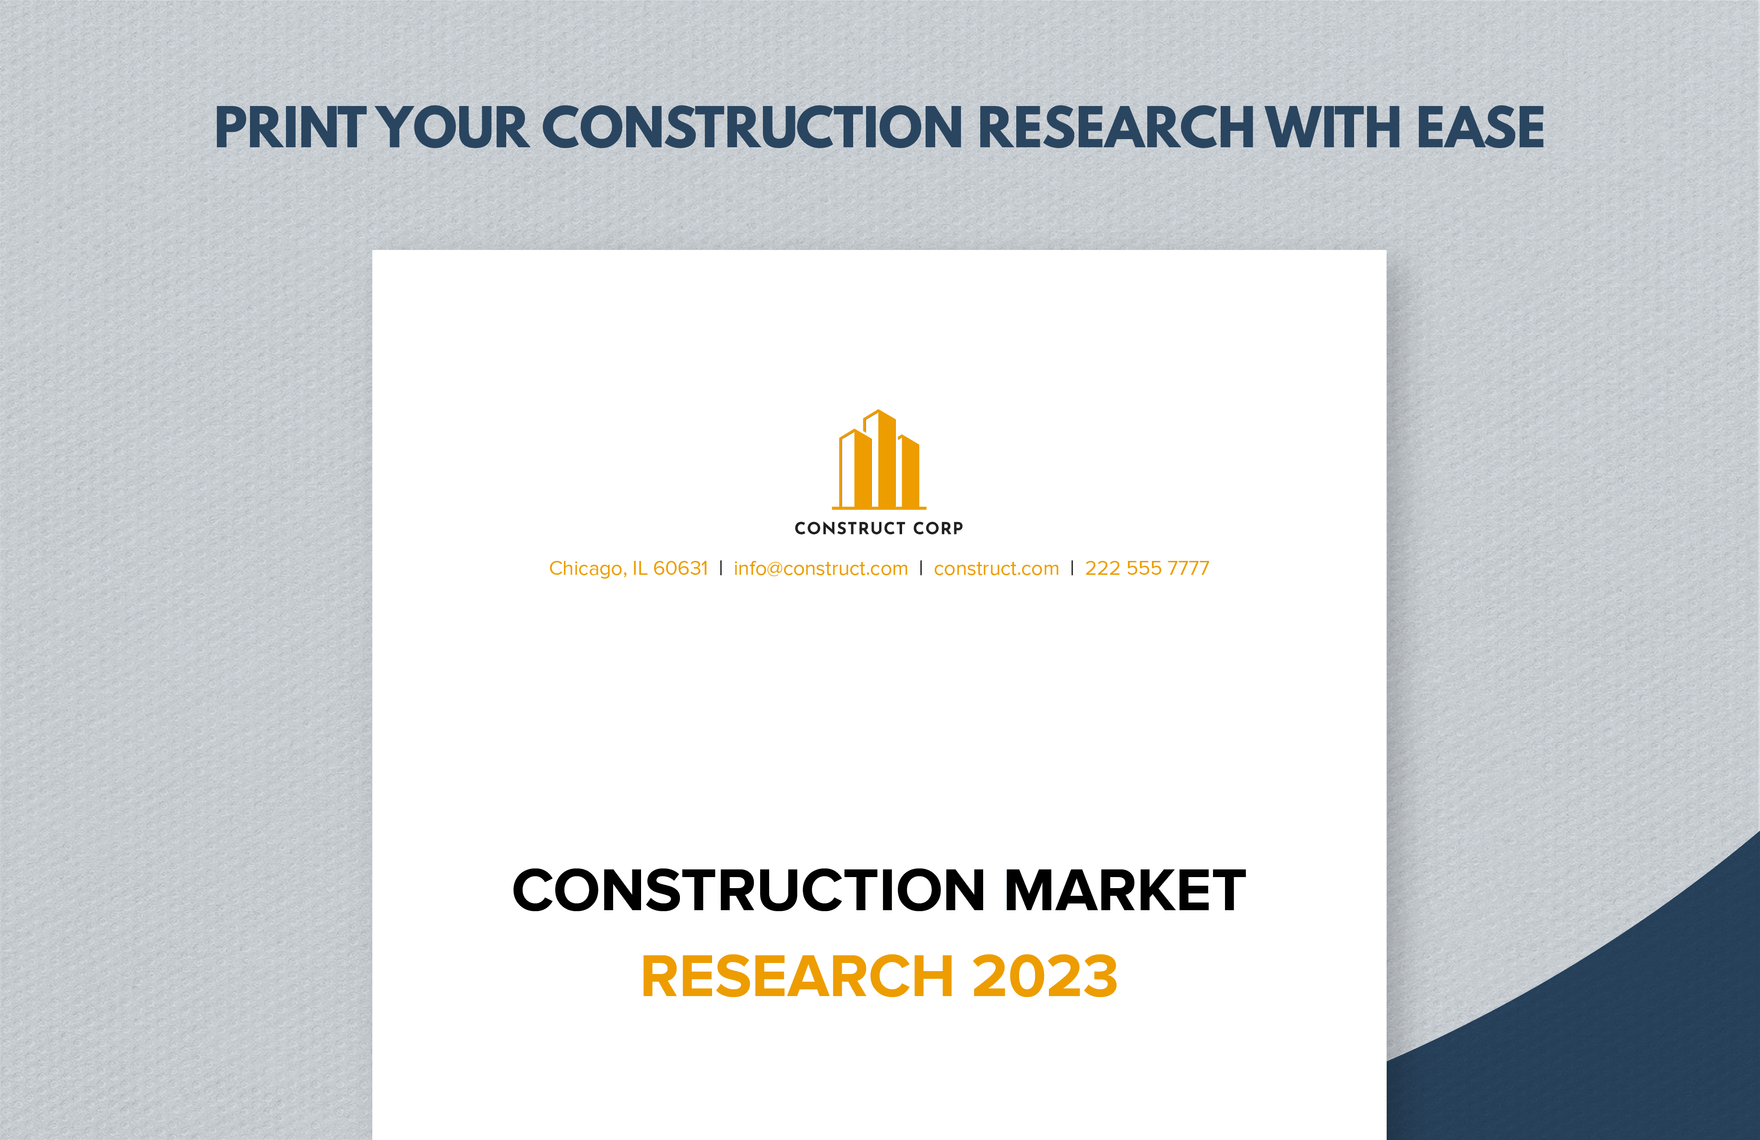 Construction Market Research 2023